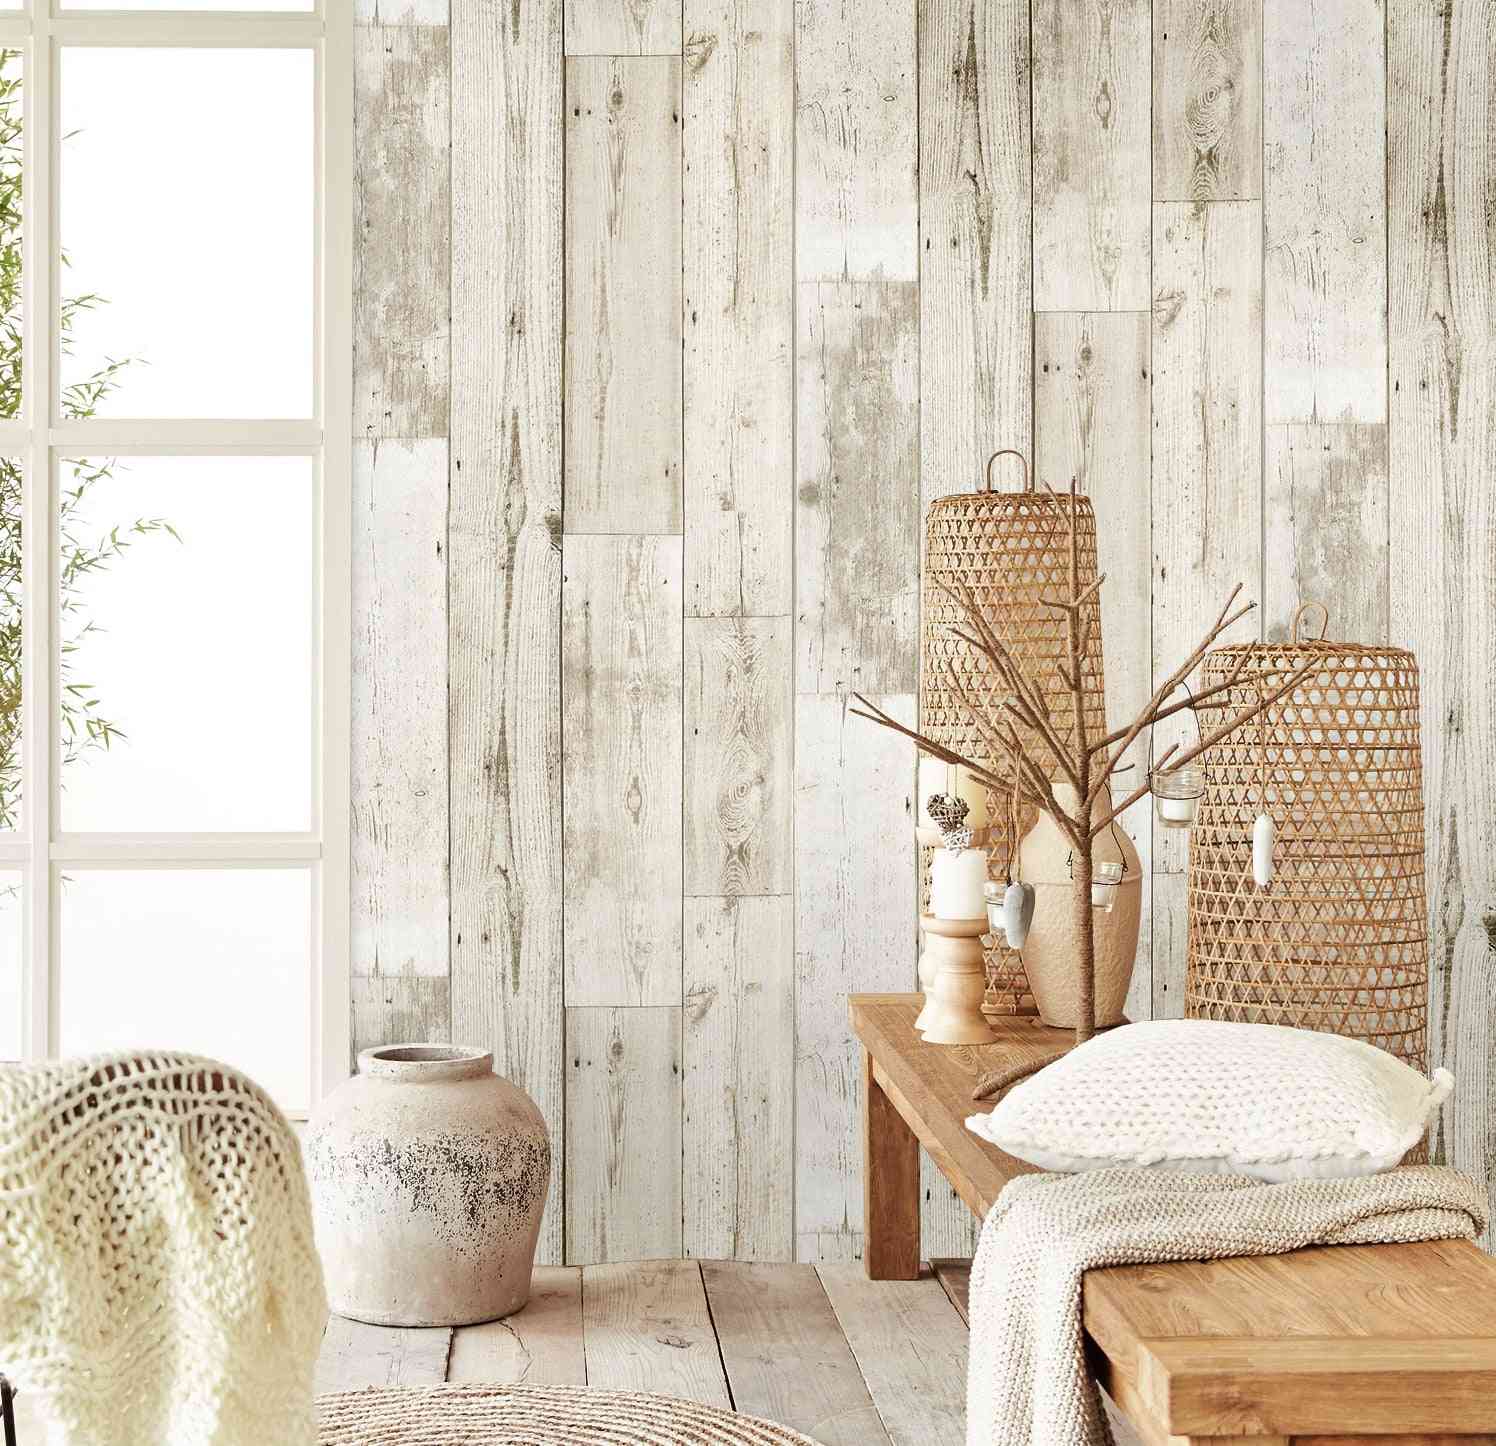 3d Waterproof Thicken Wood Panel Wallpaper For Walls, Self Adhesive Contact Paper